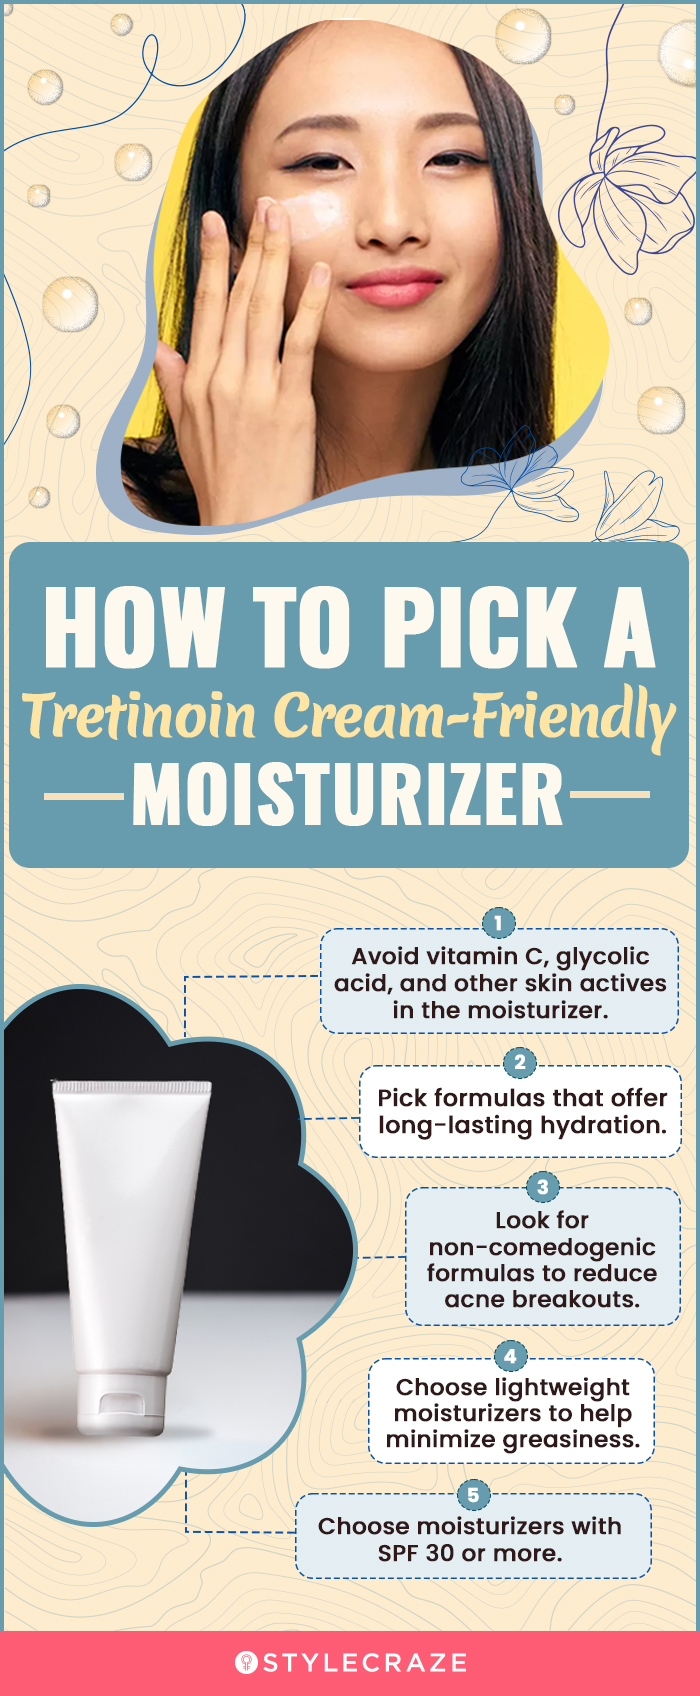 How To Pick A Tretinoin Cream-Friendly Moisturizer (infographic)